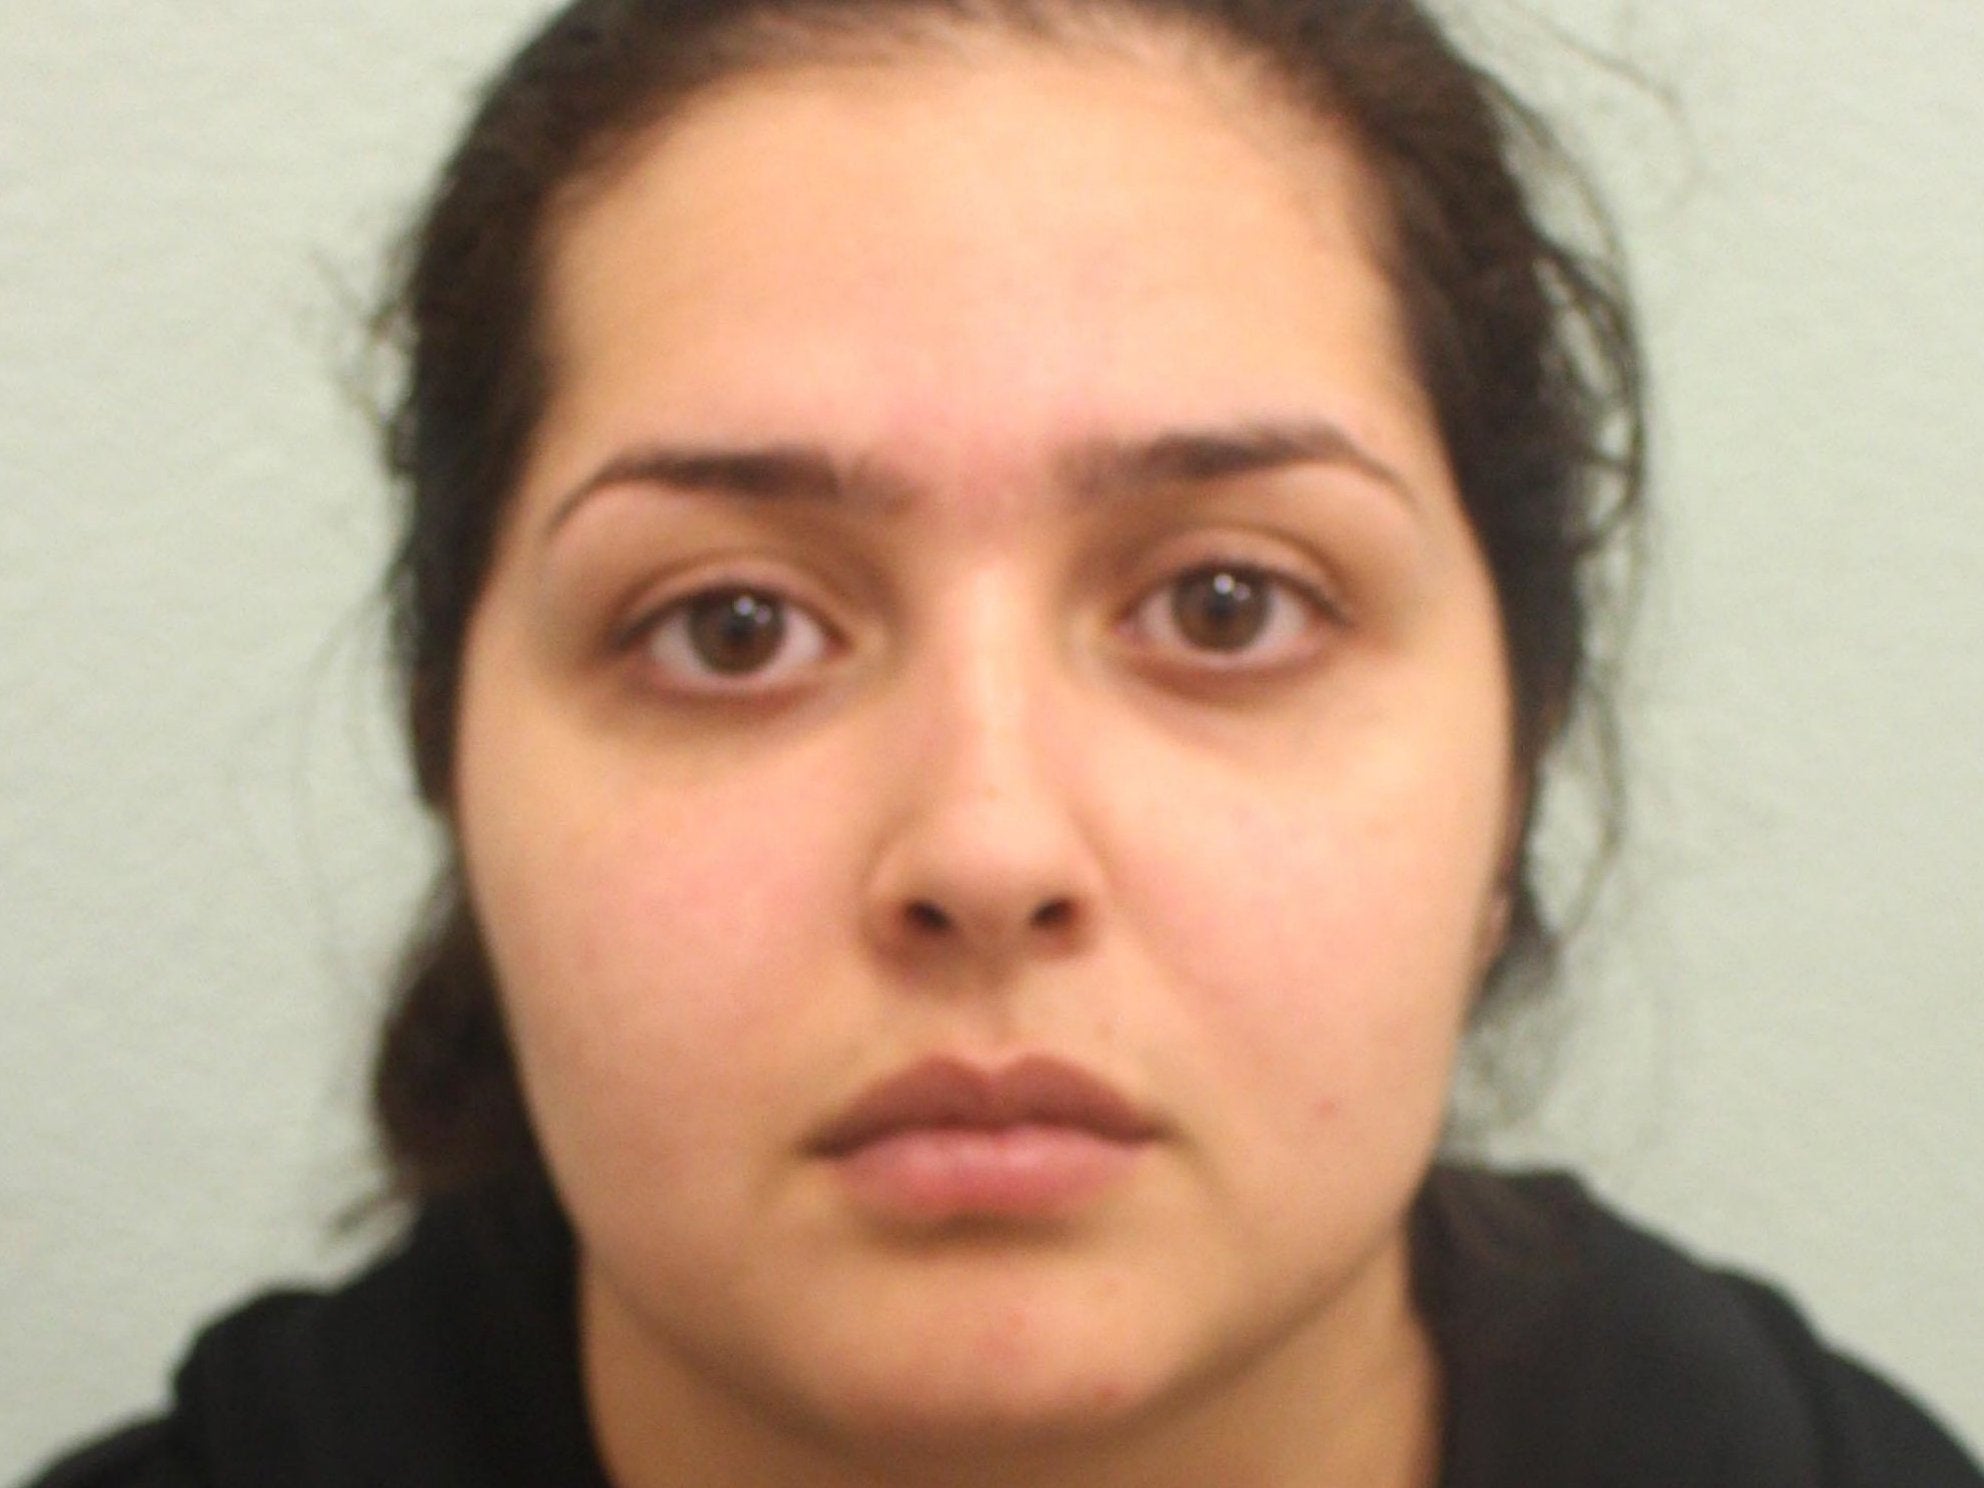 Fatima Khan plotted with a love rival to harm Afghan asylum seeker Khalid Safi, 18, with whom she had grown tired after two years together.